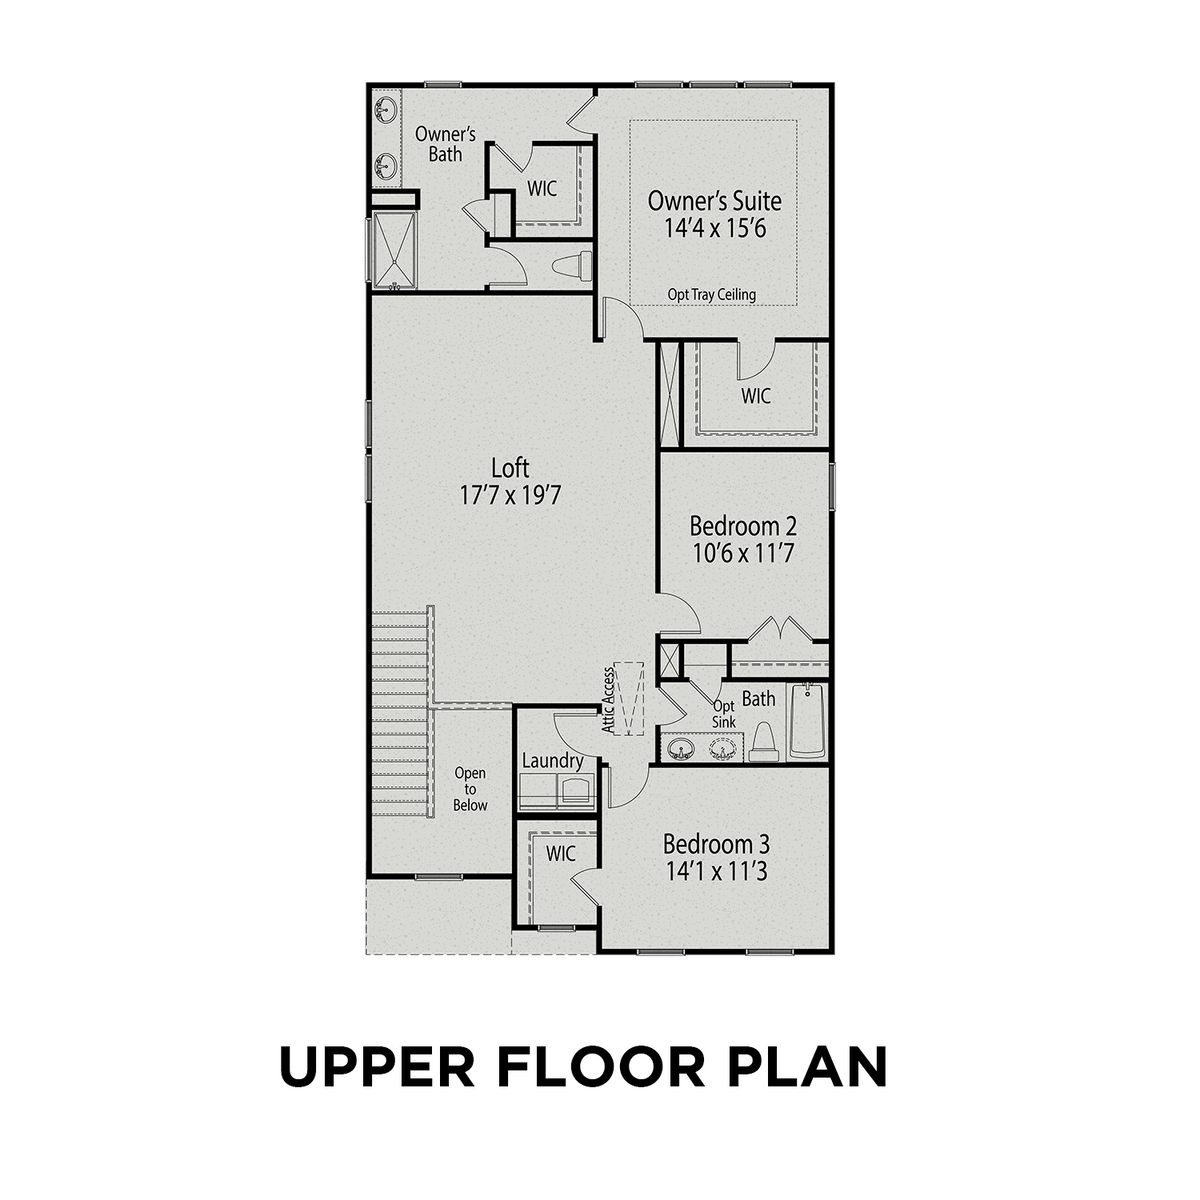 2 - The Adalynn A floor plan layout for 55 Grassy Ridge Court in Davidson Homes' Beverly Place community.